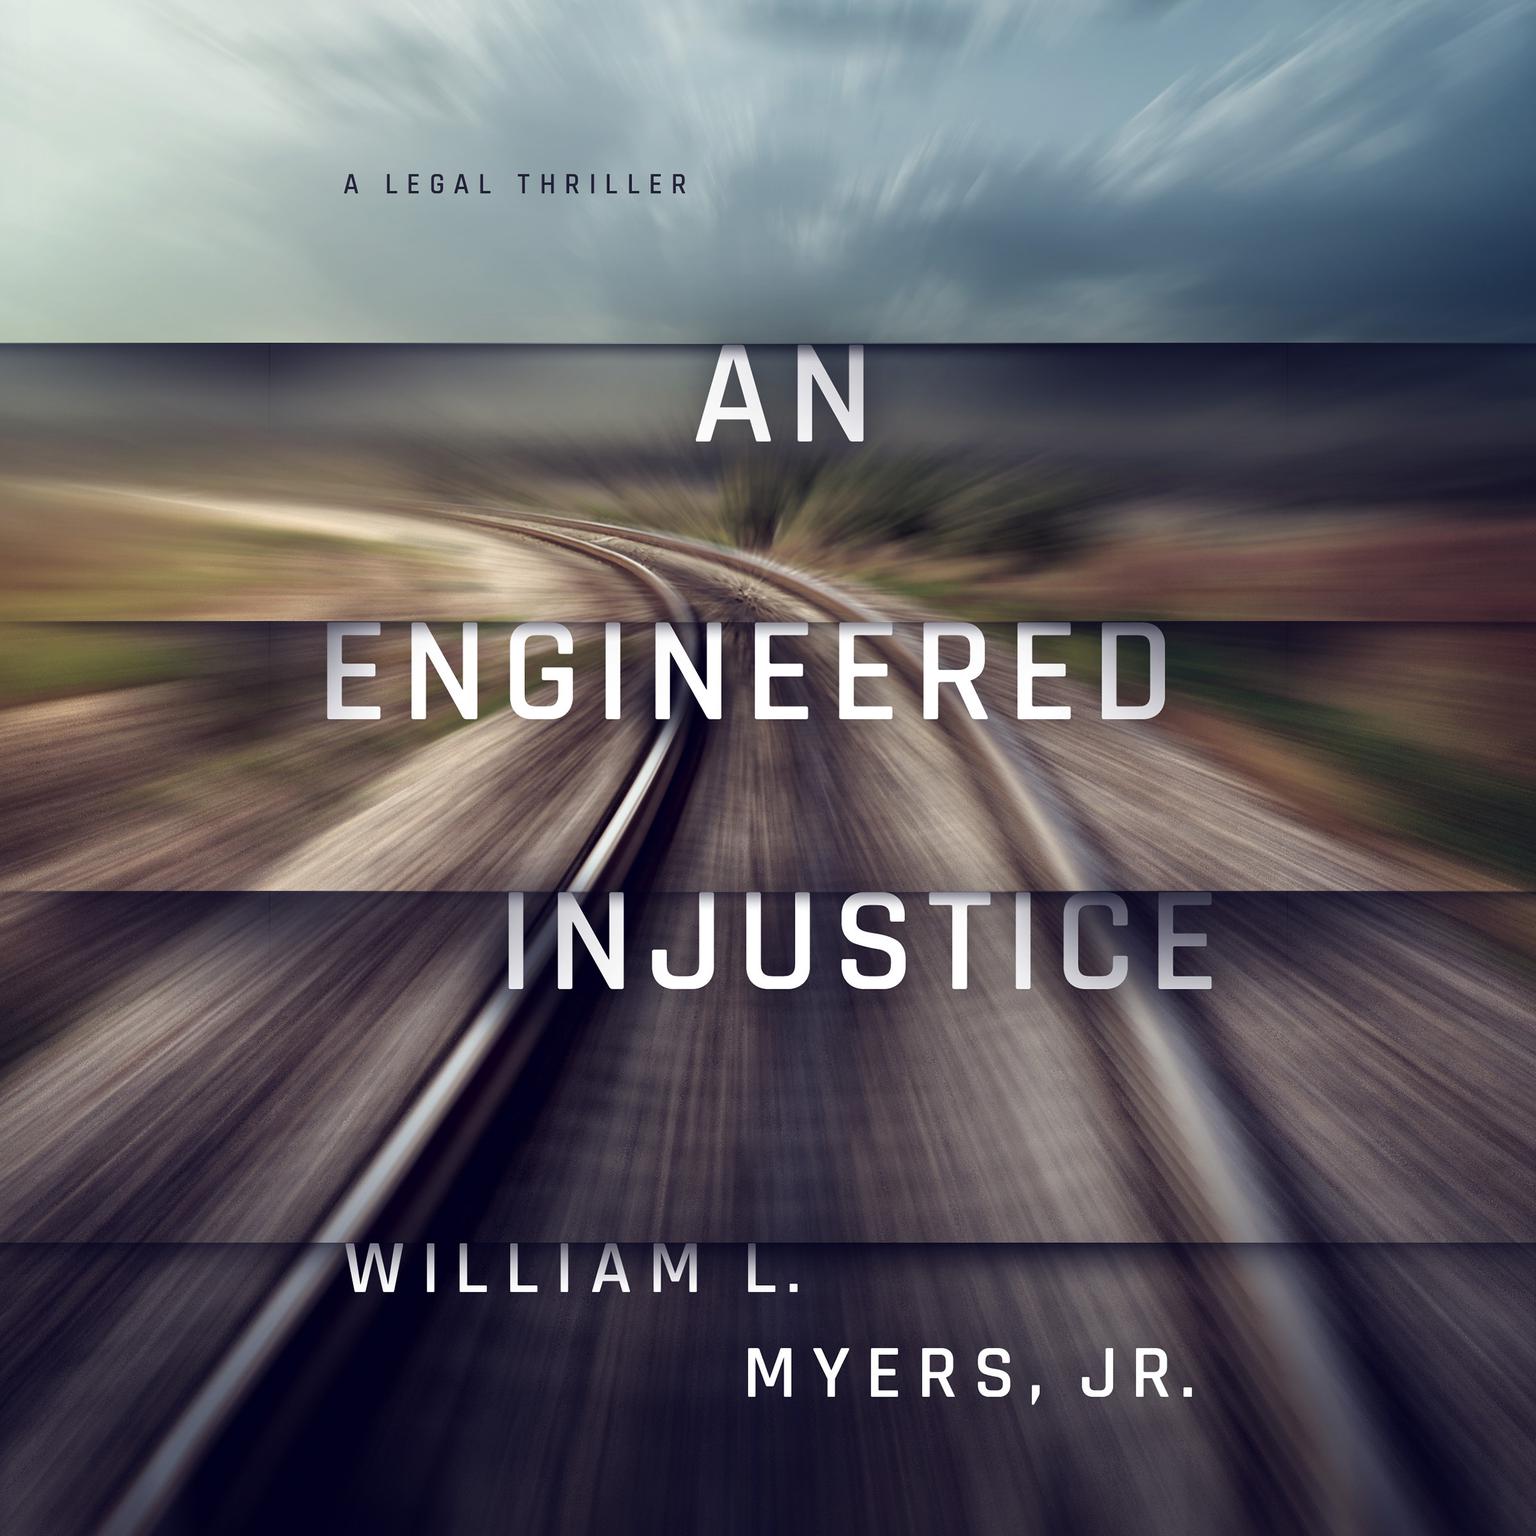 An Engineered Injustice: A Legal Thriller Audiobook, by William L. Myers